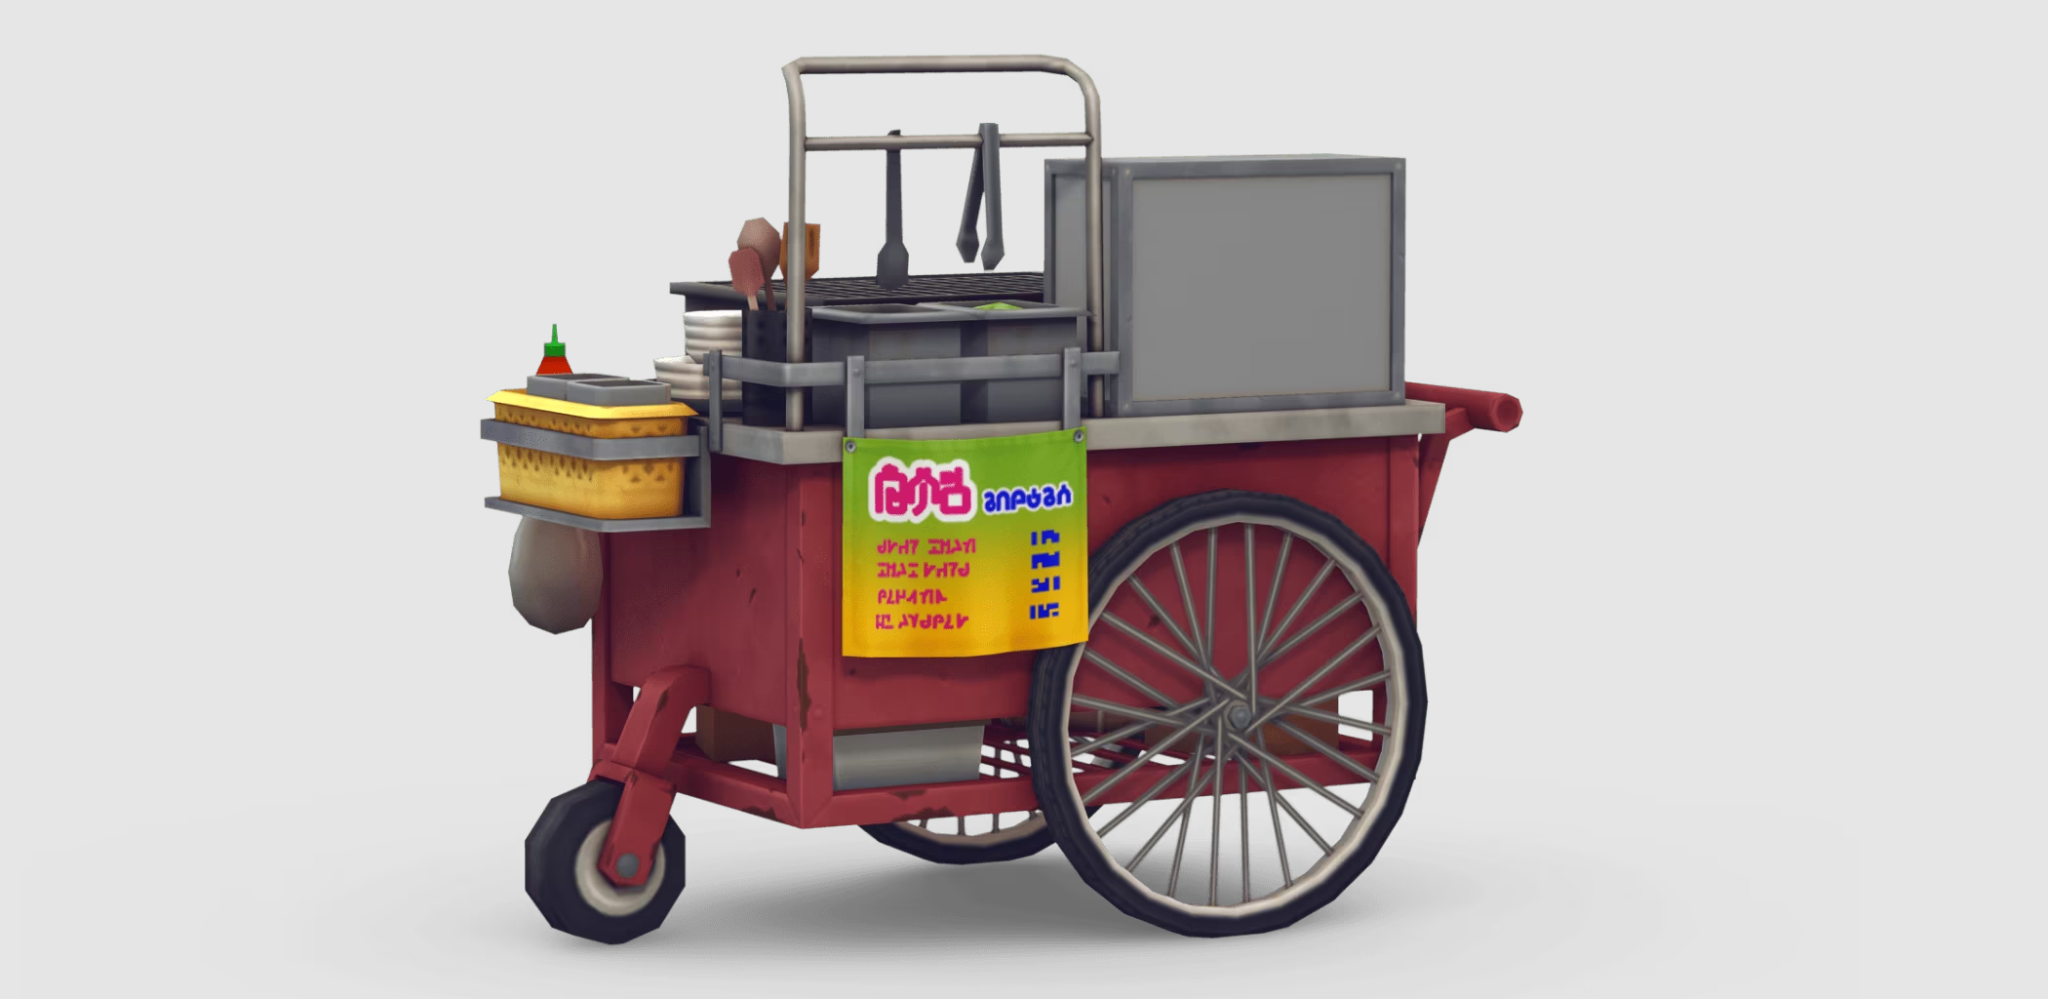 The Sims 4 For Rent - Quick Treats Grill Cart